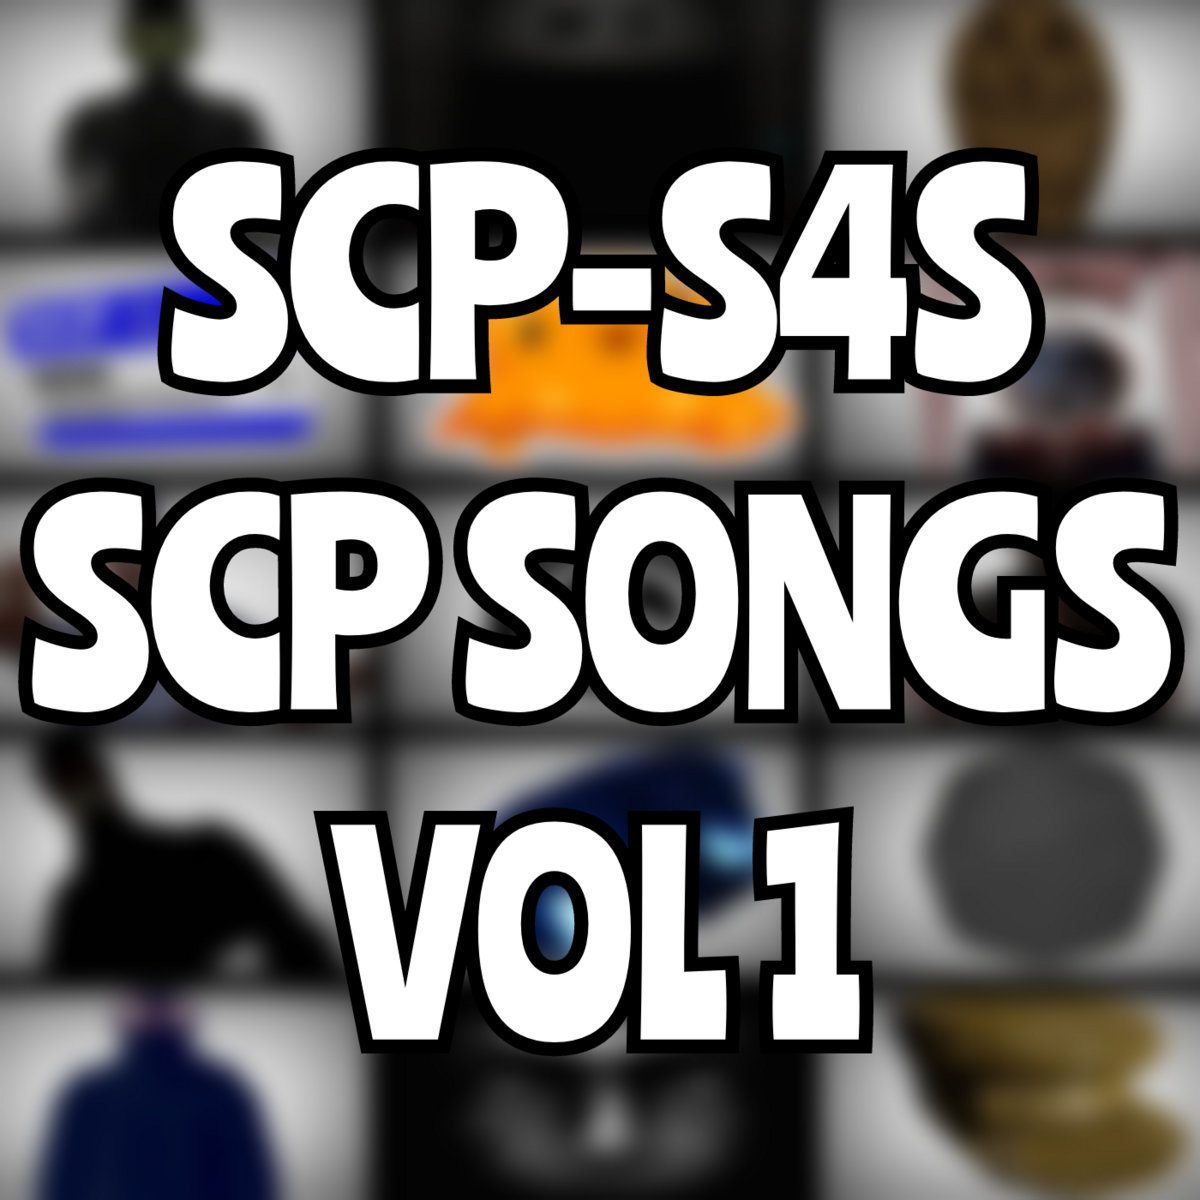 When did SCP-S4S release “SCP-007 Song”?